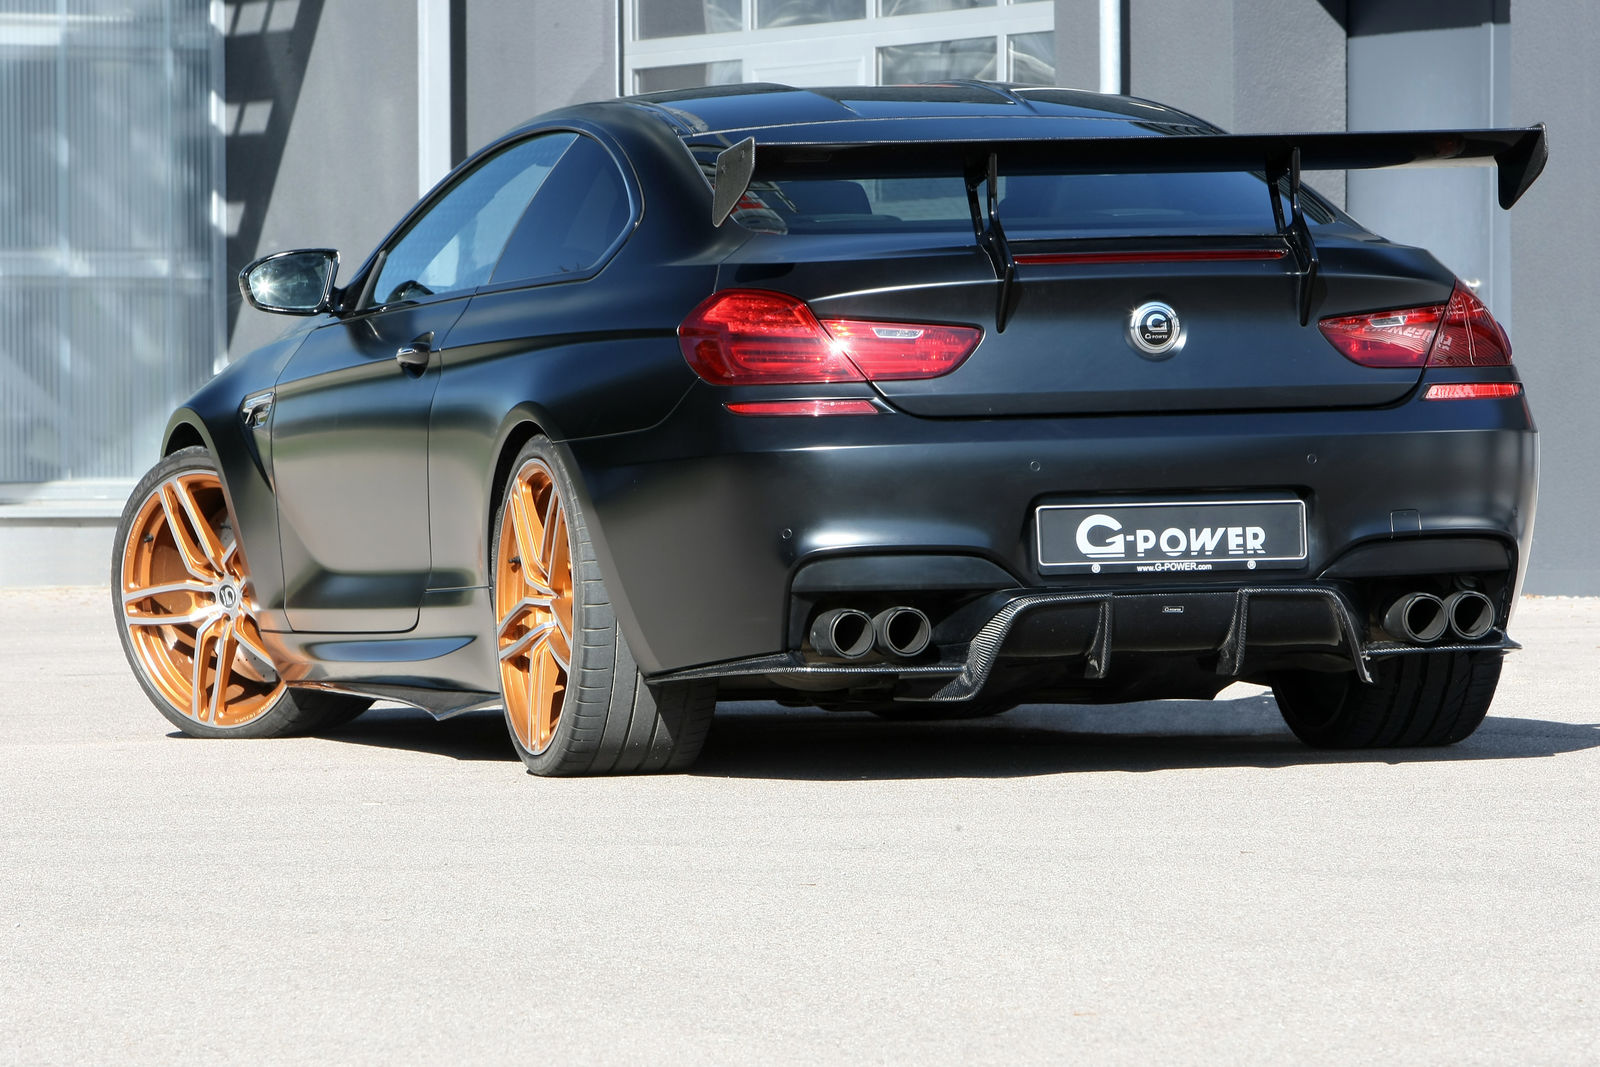 G Power S Bmw M6 Coupe Has 800 Ps And M4 Gts Like Looks Carscoops